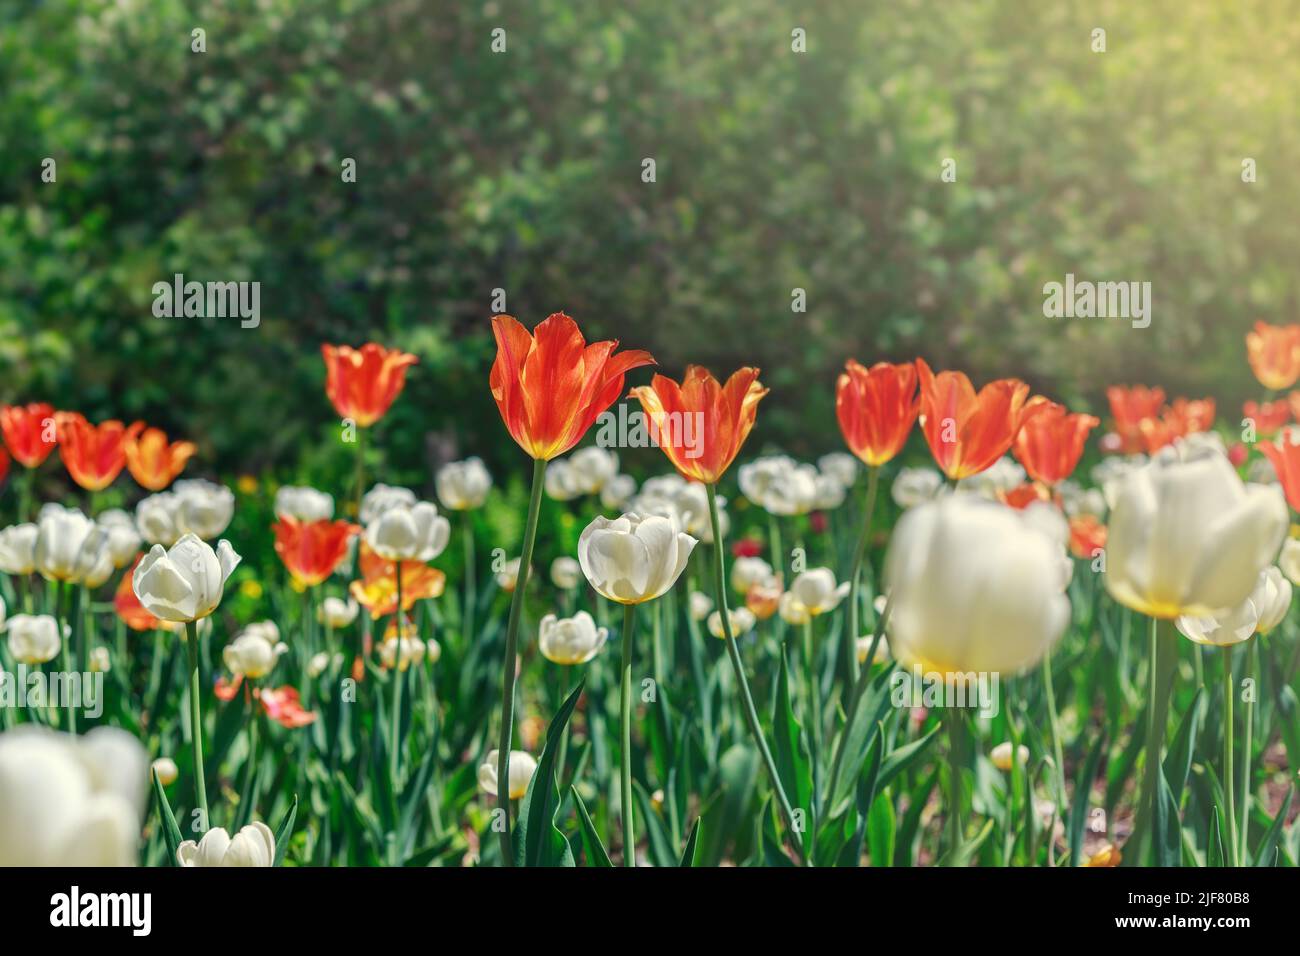 Natural spring background. Flowers in the park on a sunny day. Garden with beautiful red and white tulips. Stock Photo